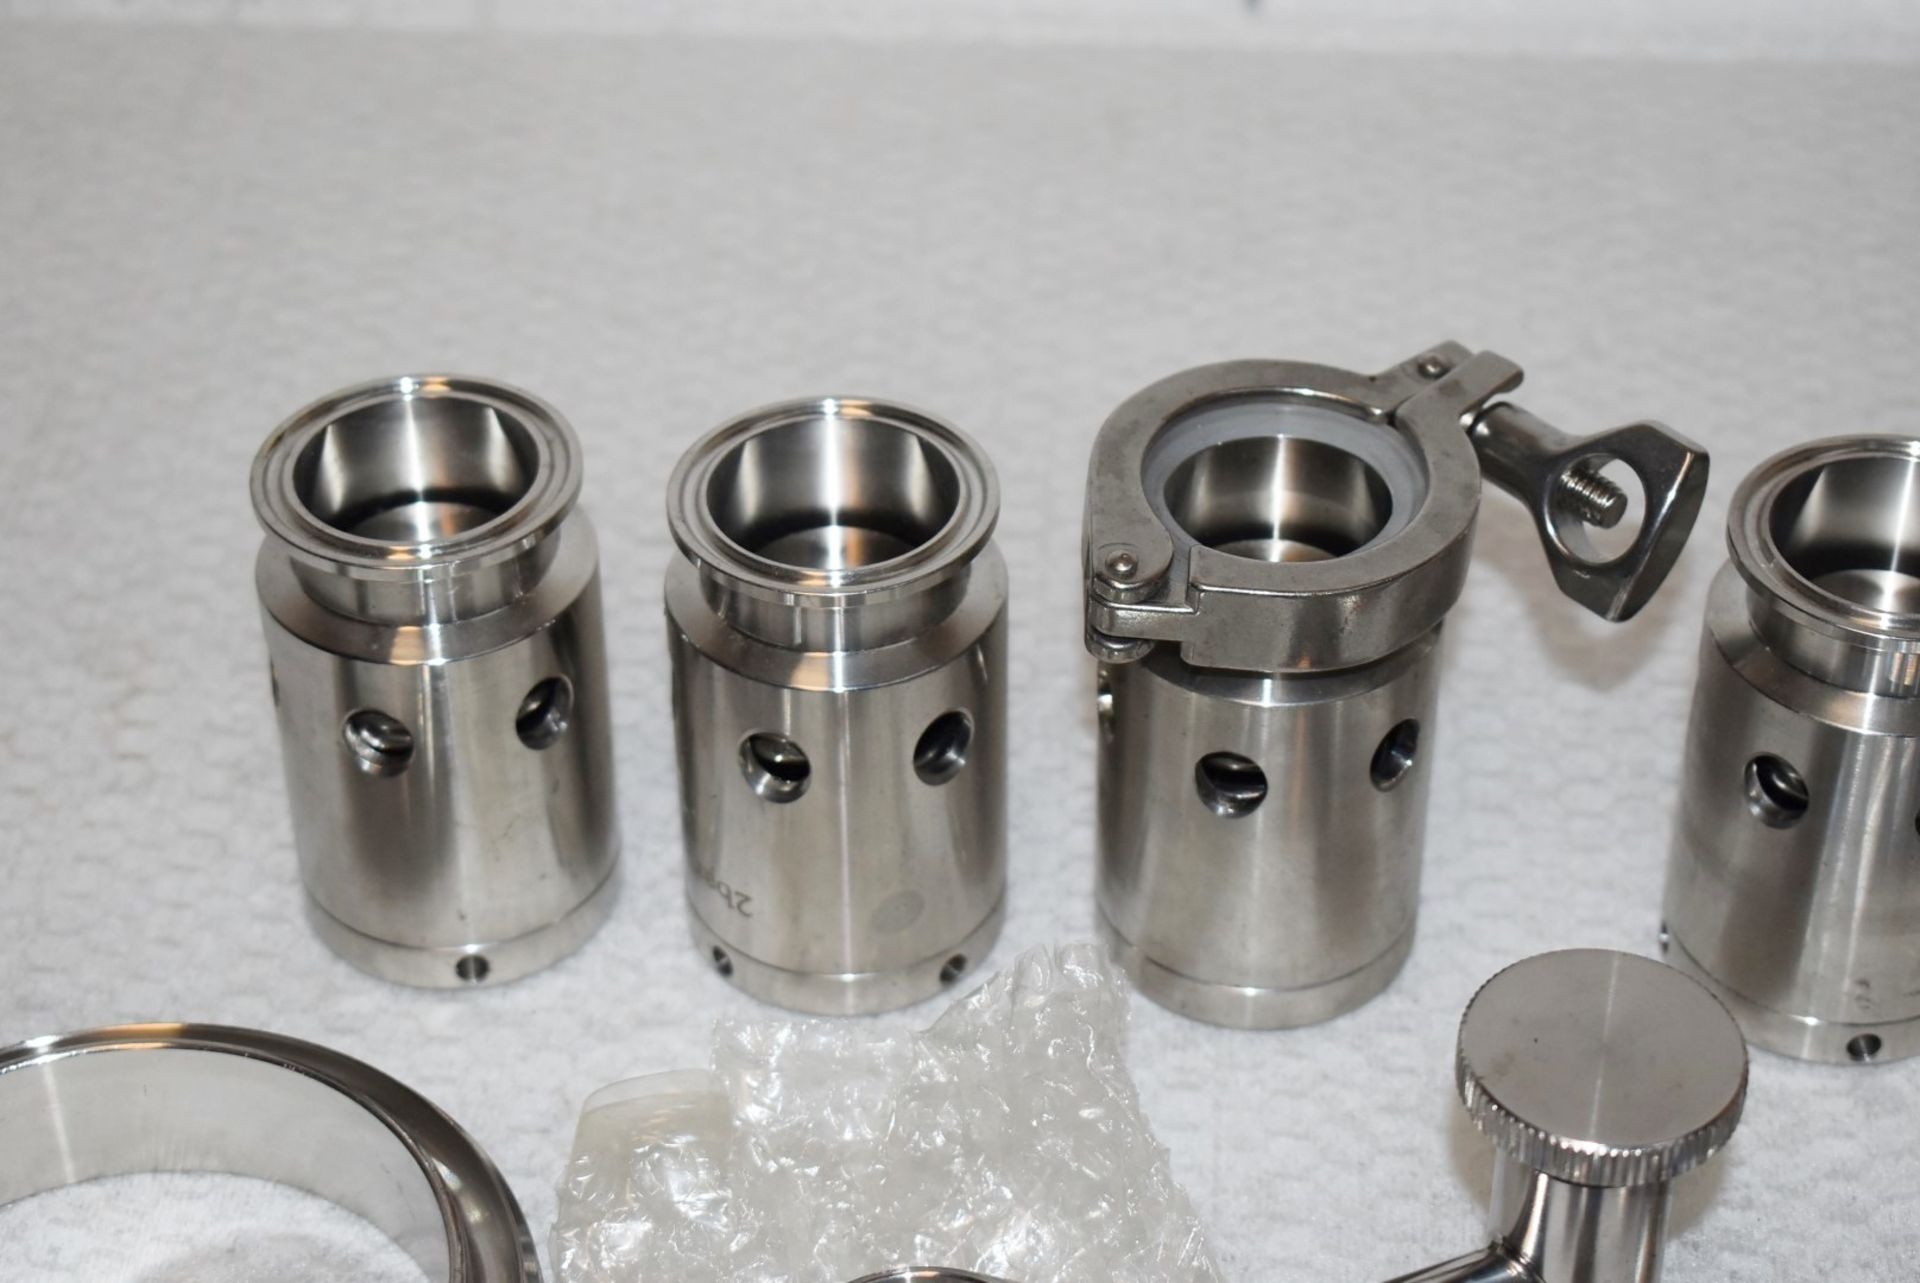 Assorted Job Lot of Stainless Steel Fittings For Brewery Equipment - Includes Approx 70 Pieces - - Image 3 of 14